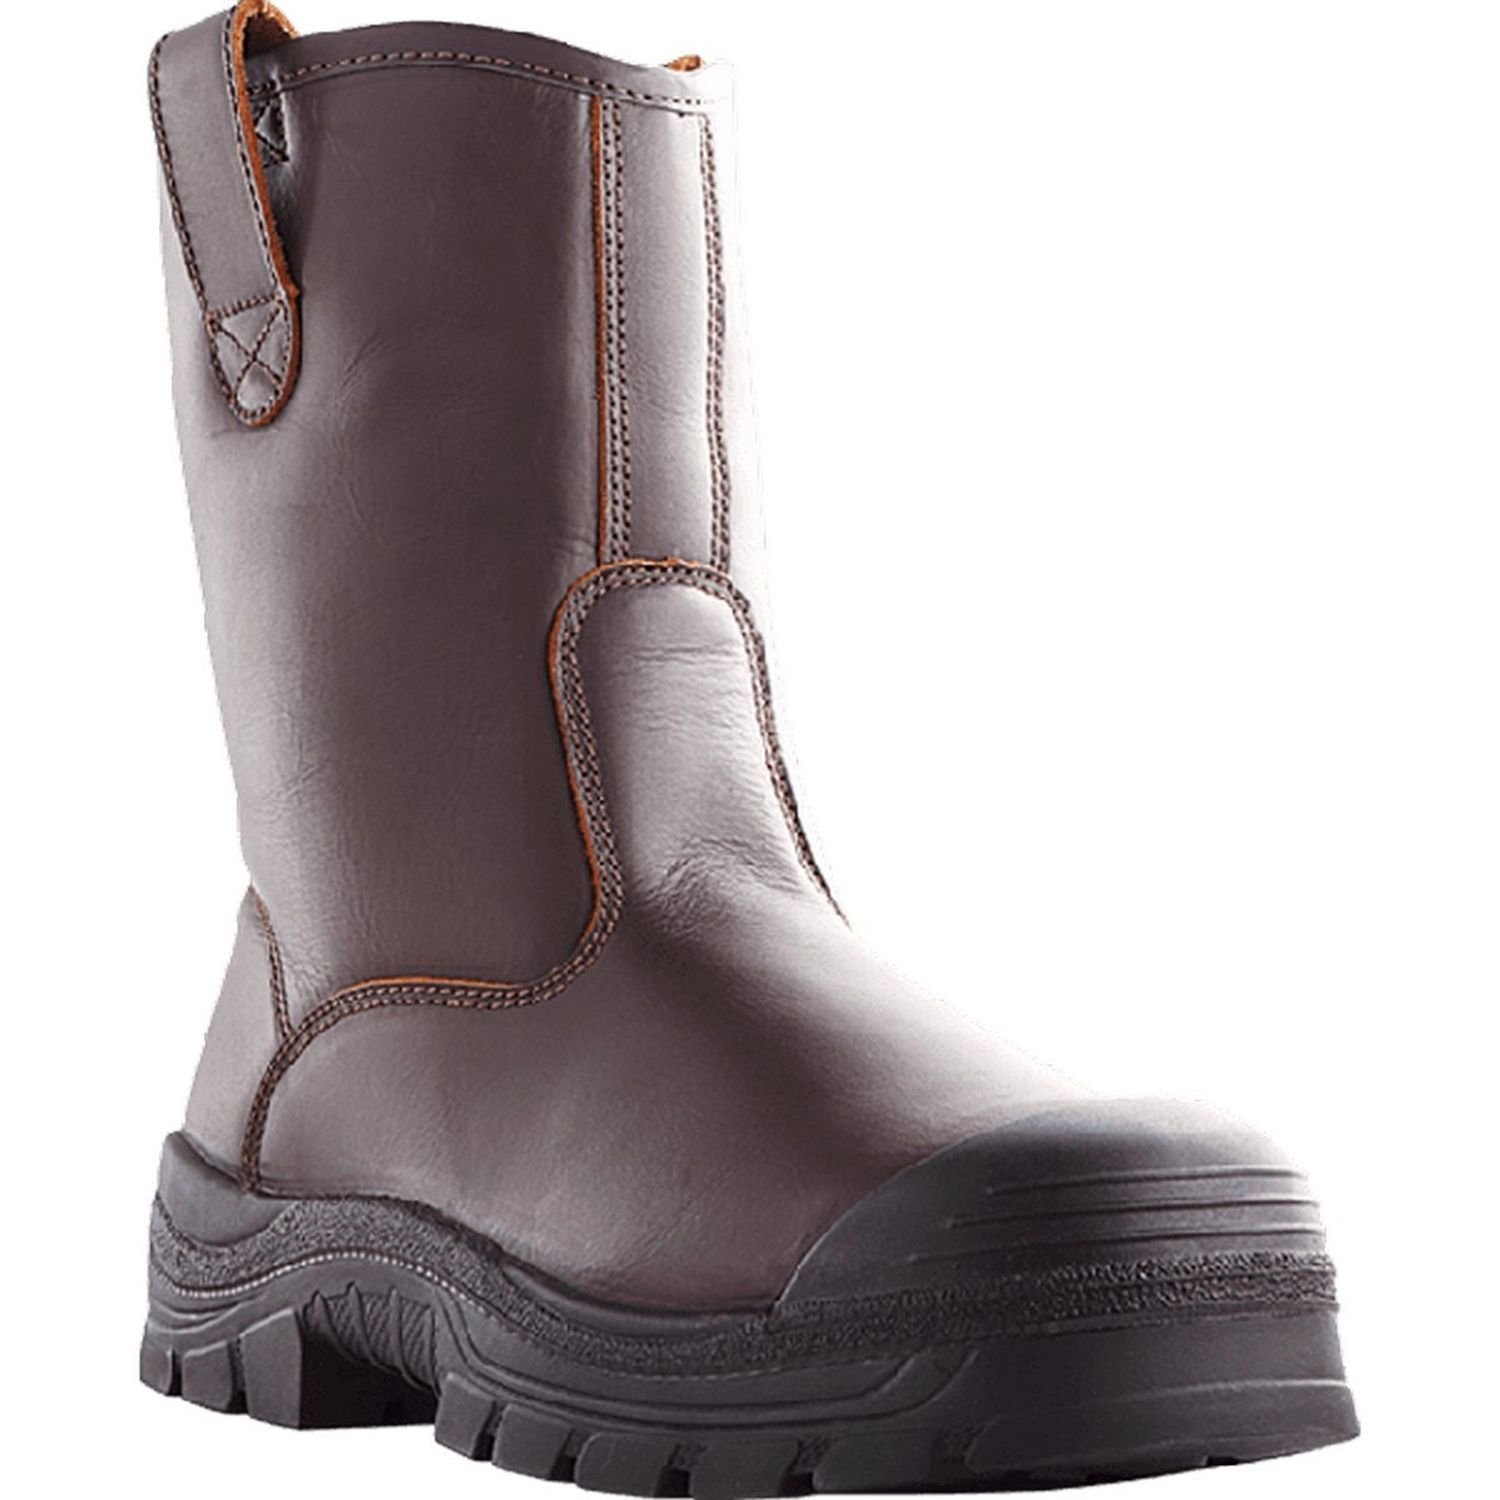 Howler Everest 230mm Rigger Safety Boot With Bump Cap Brown